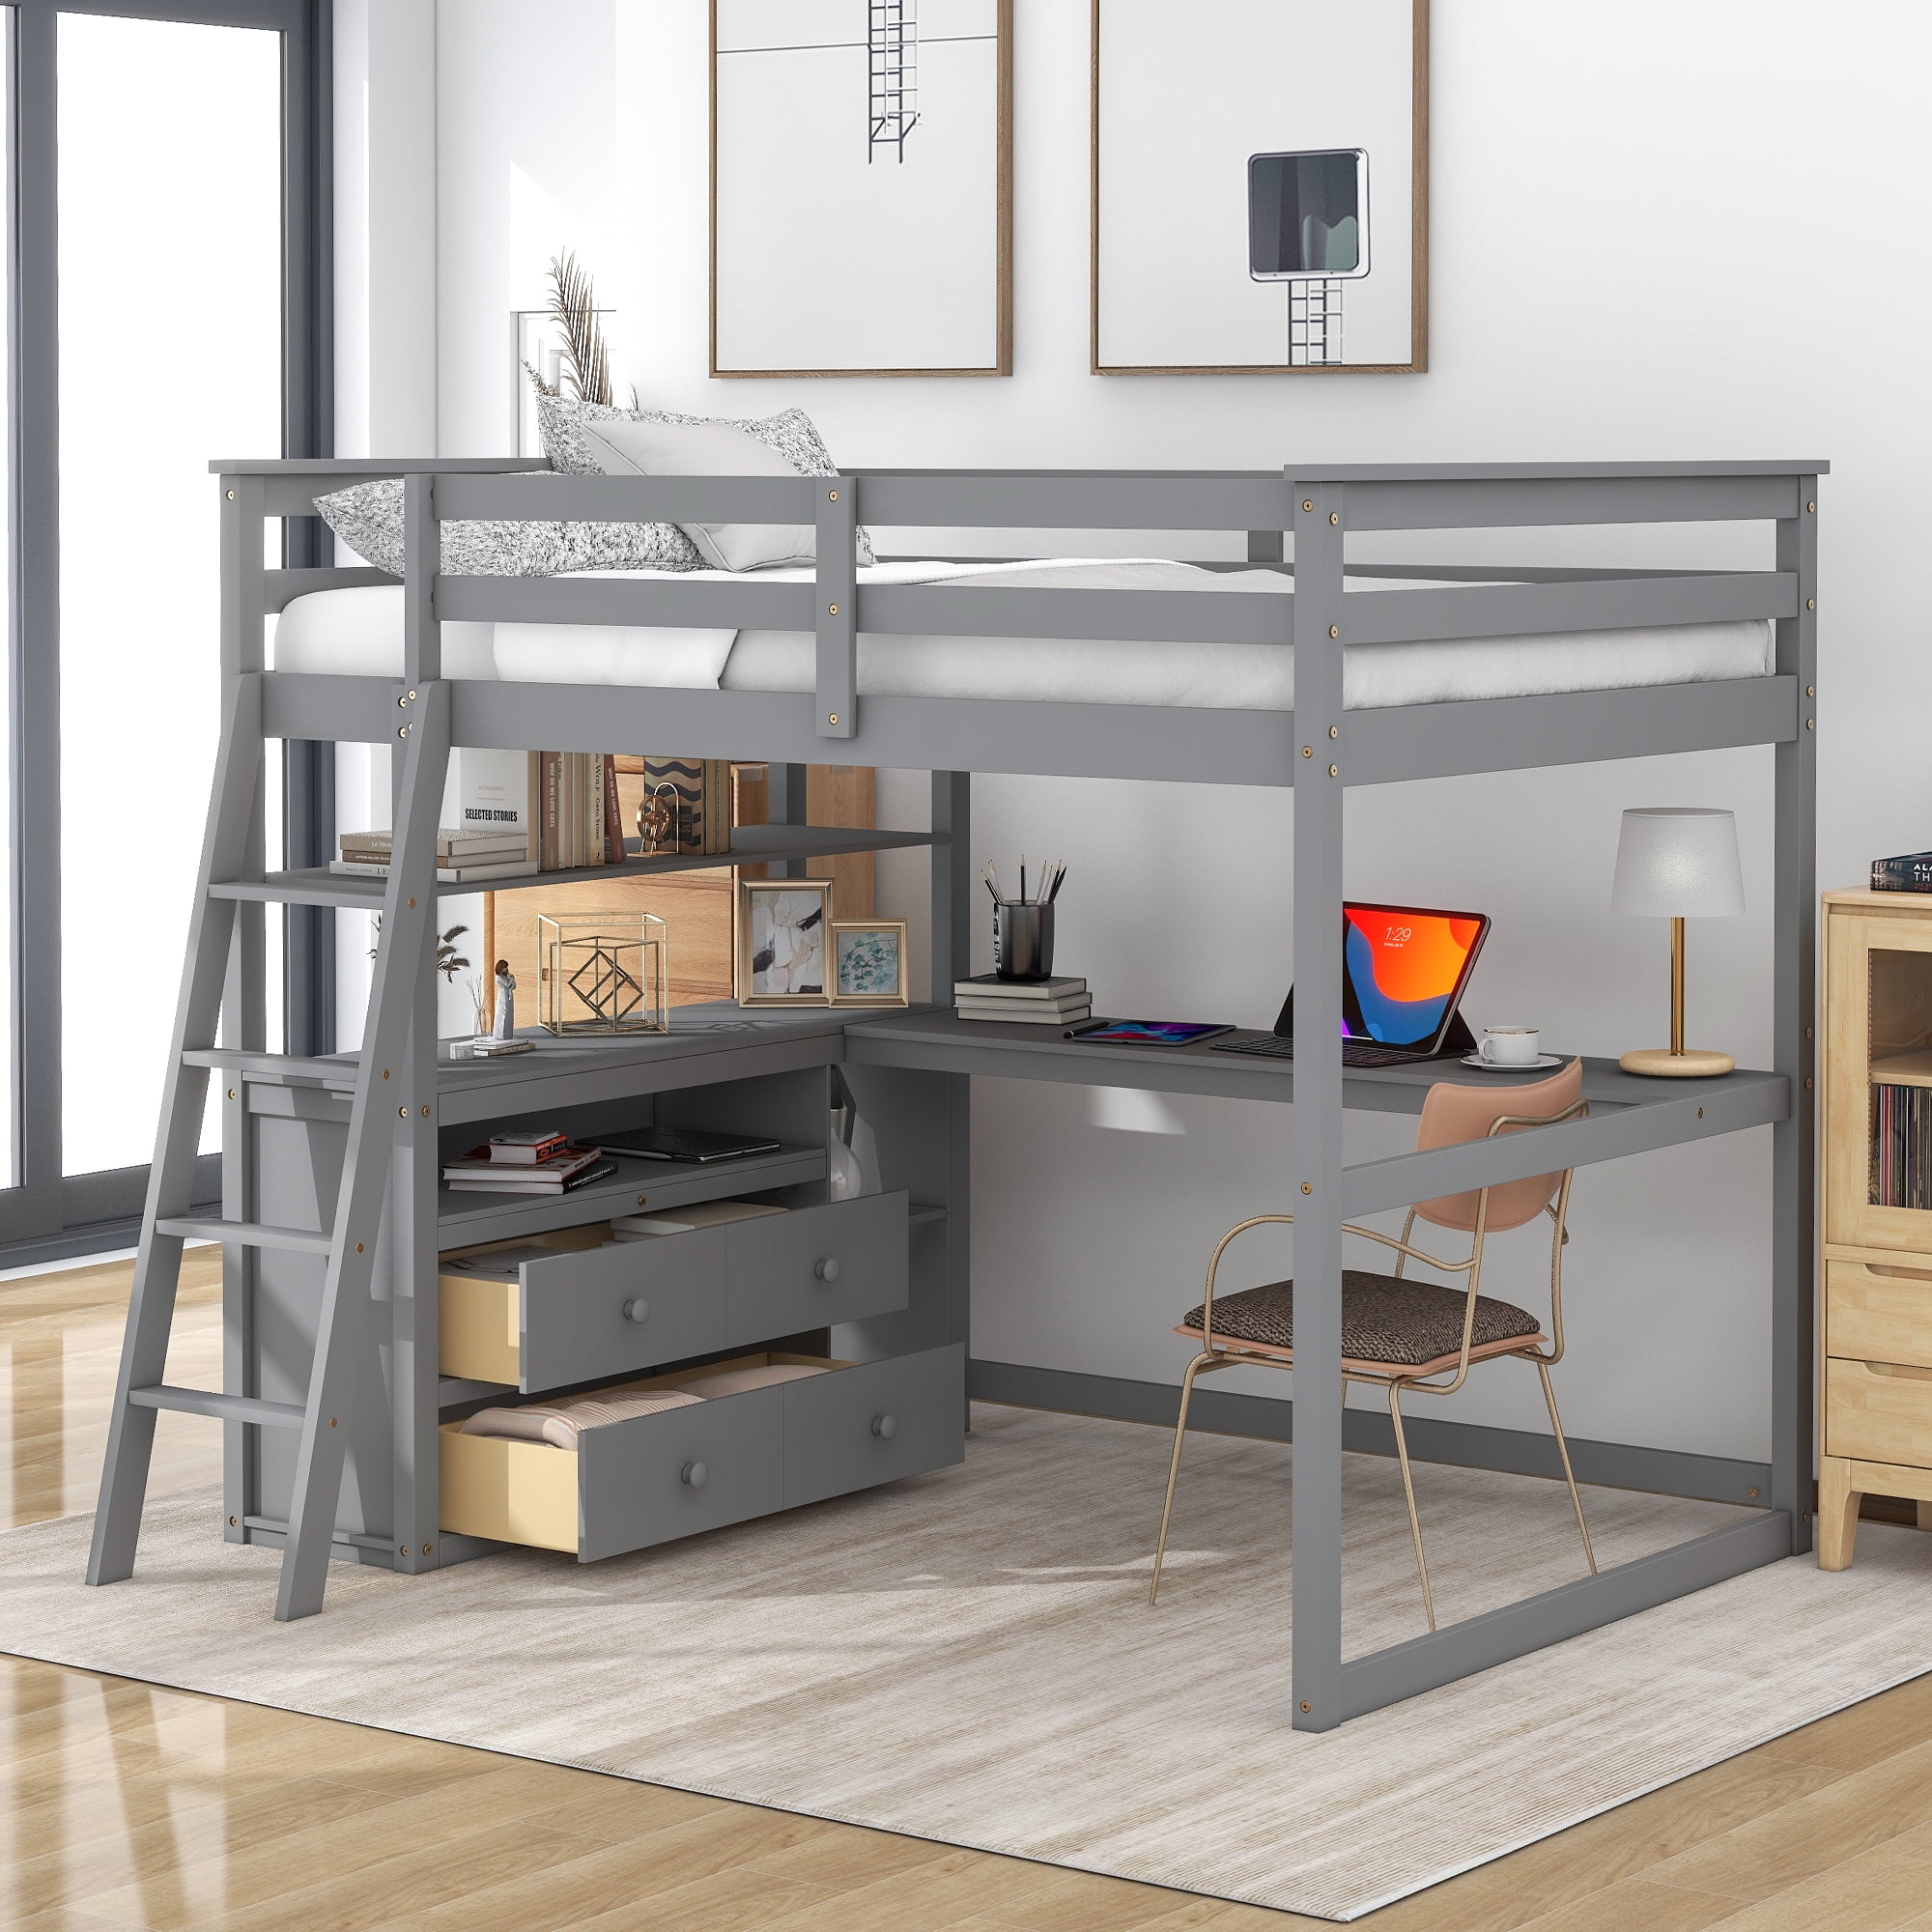 Euroco Full Size Wood Loft Bed with Desk, Shelves and Cabinets for Kids ...